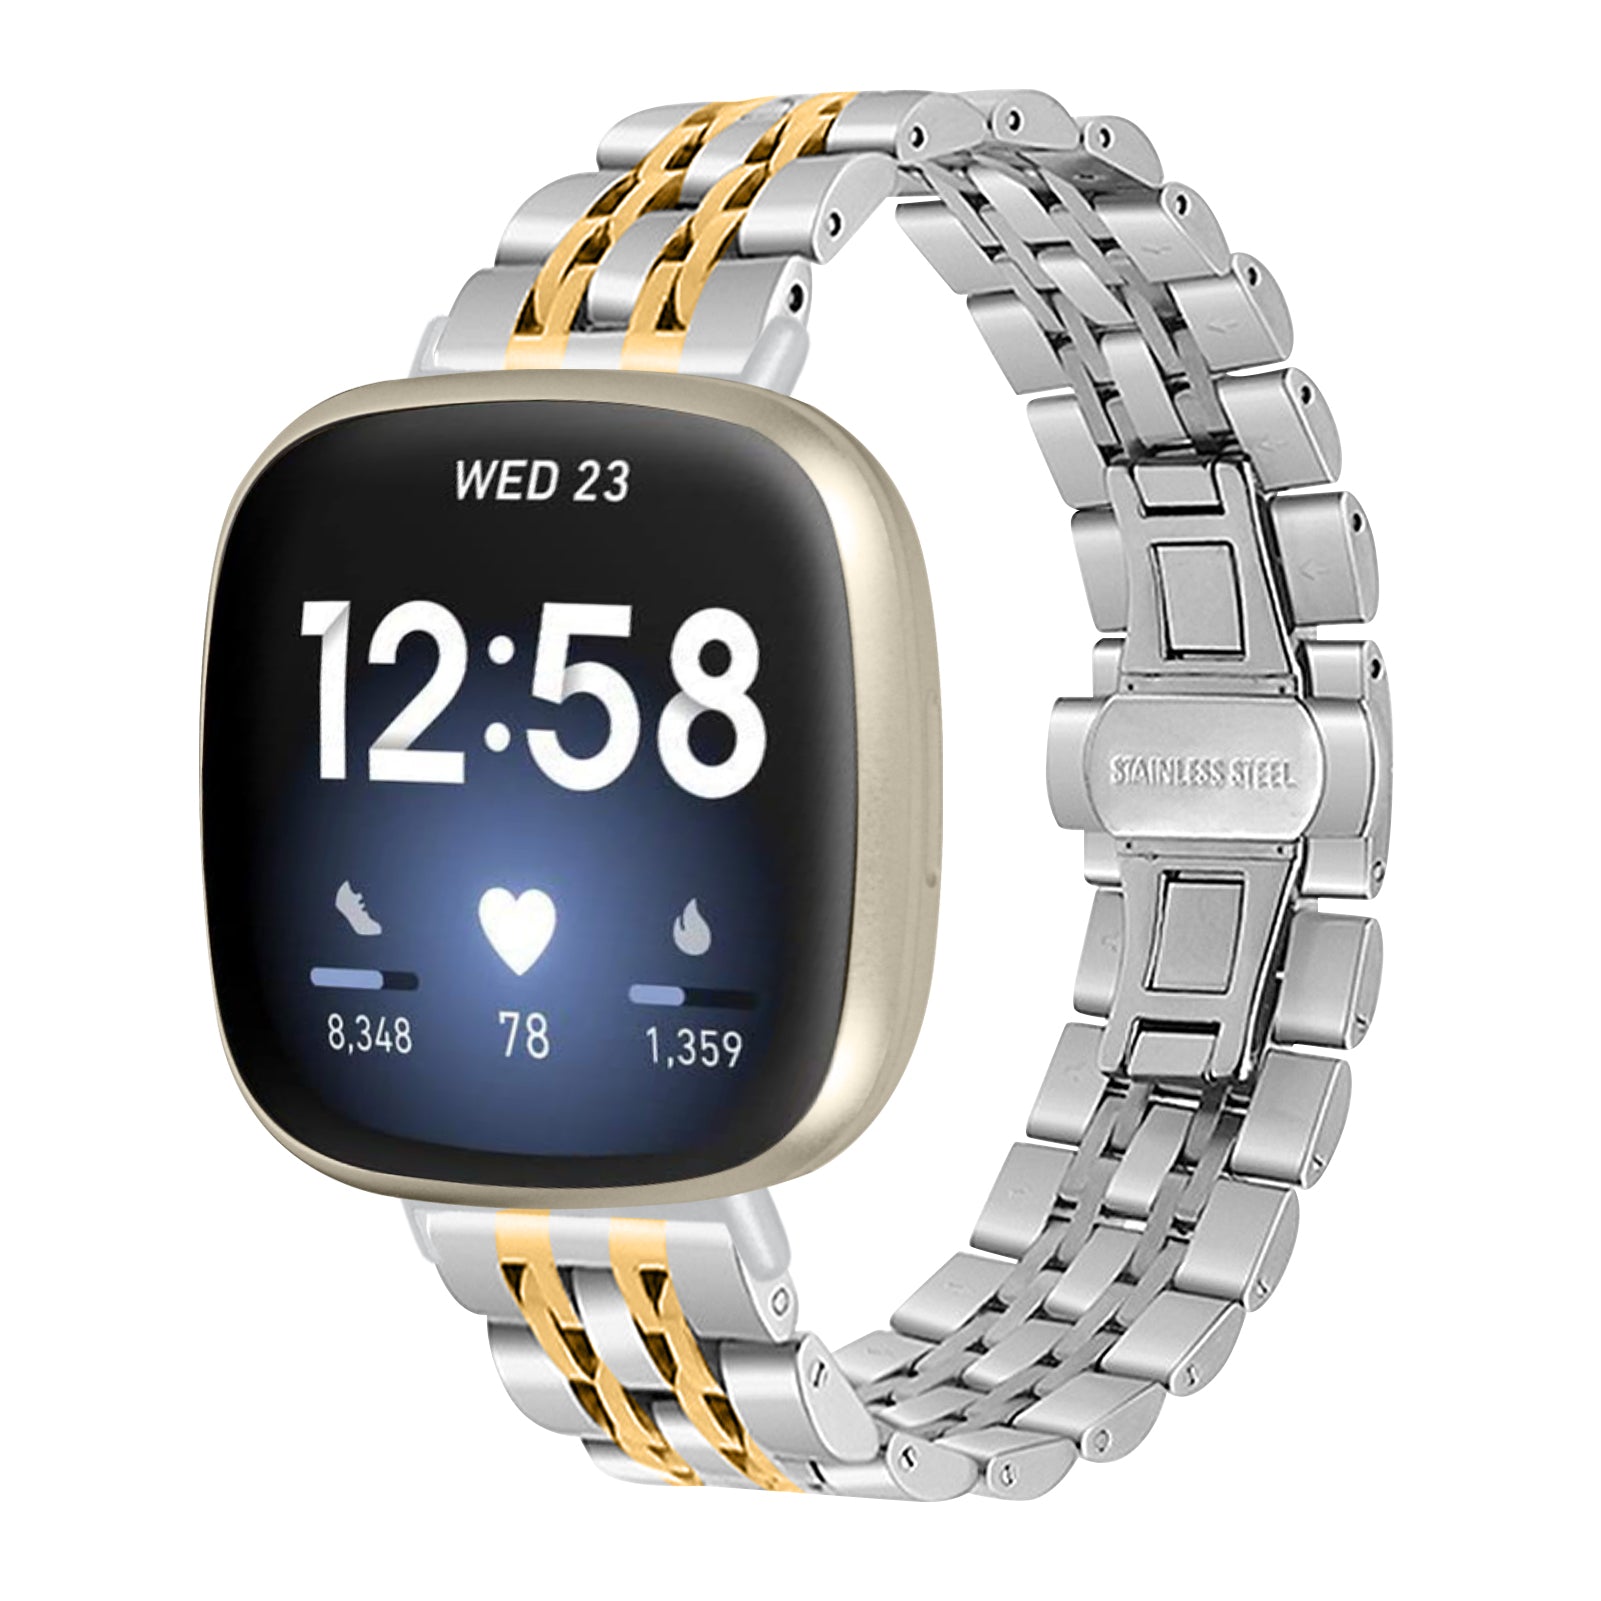 For Fitbit Sense 2 / Versa 4 Stainless Steel Watch Band Stylish 7 Beads Design Replacement Wrist Strap - Silver / Gold